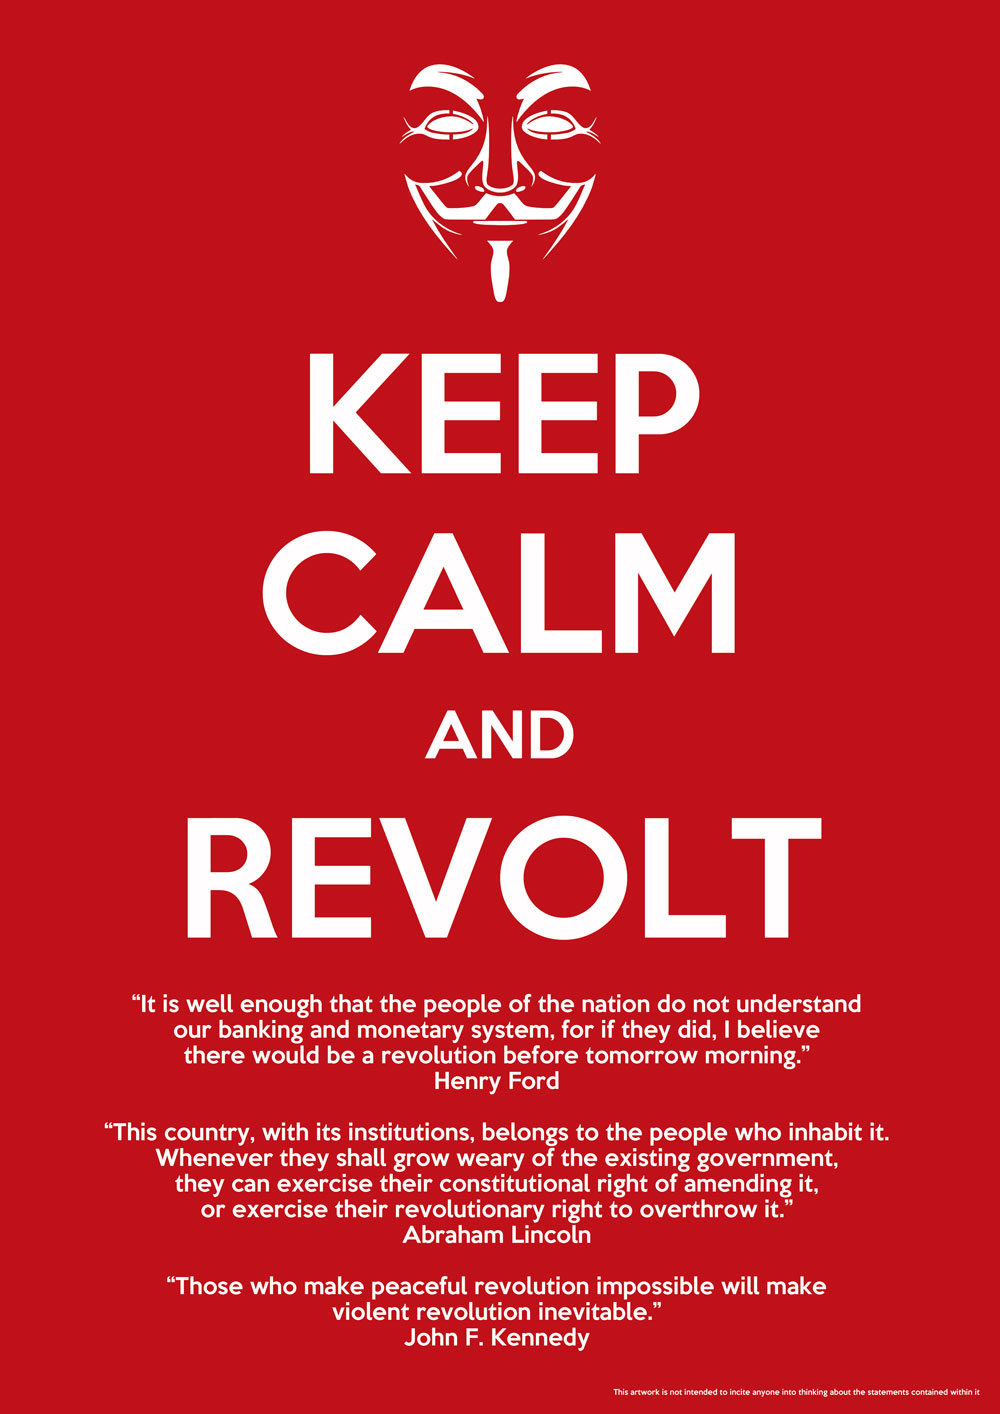 47264456 keep calm and revolt peace quote